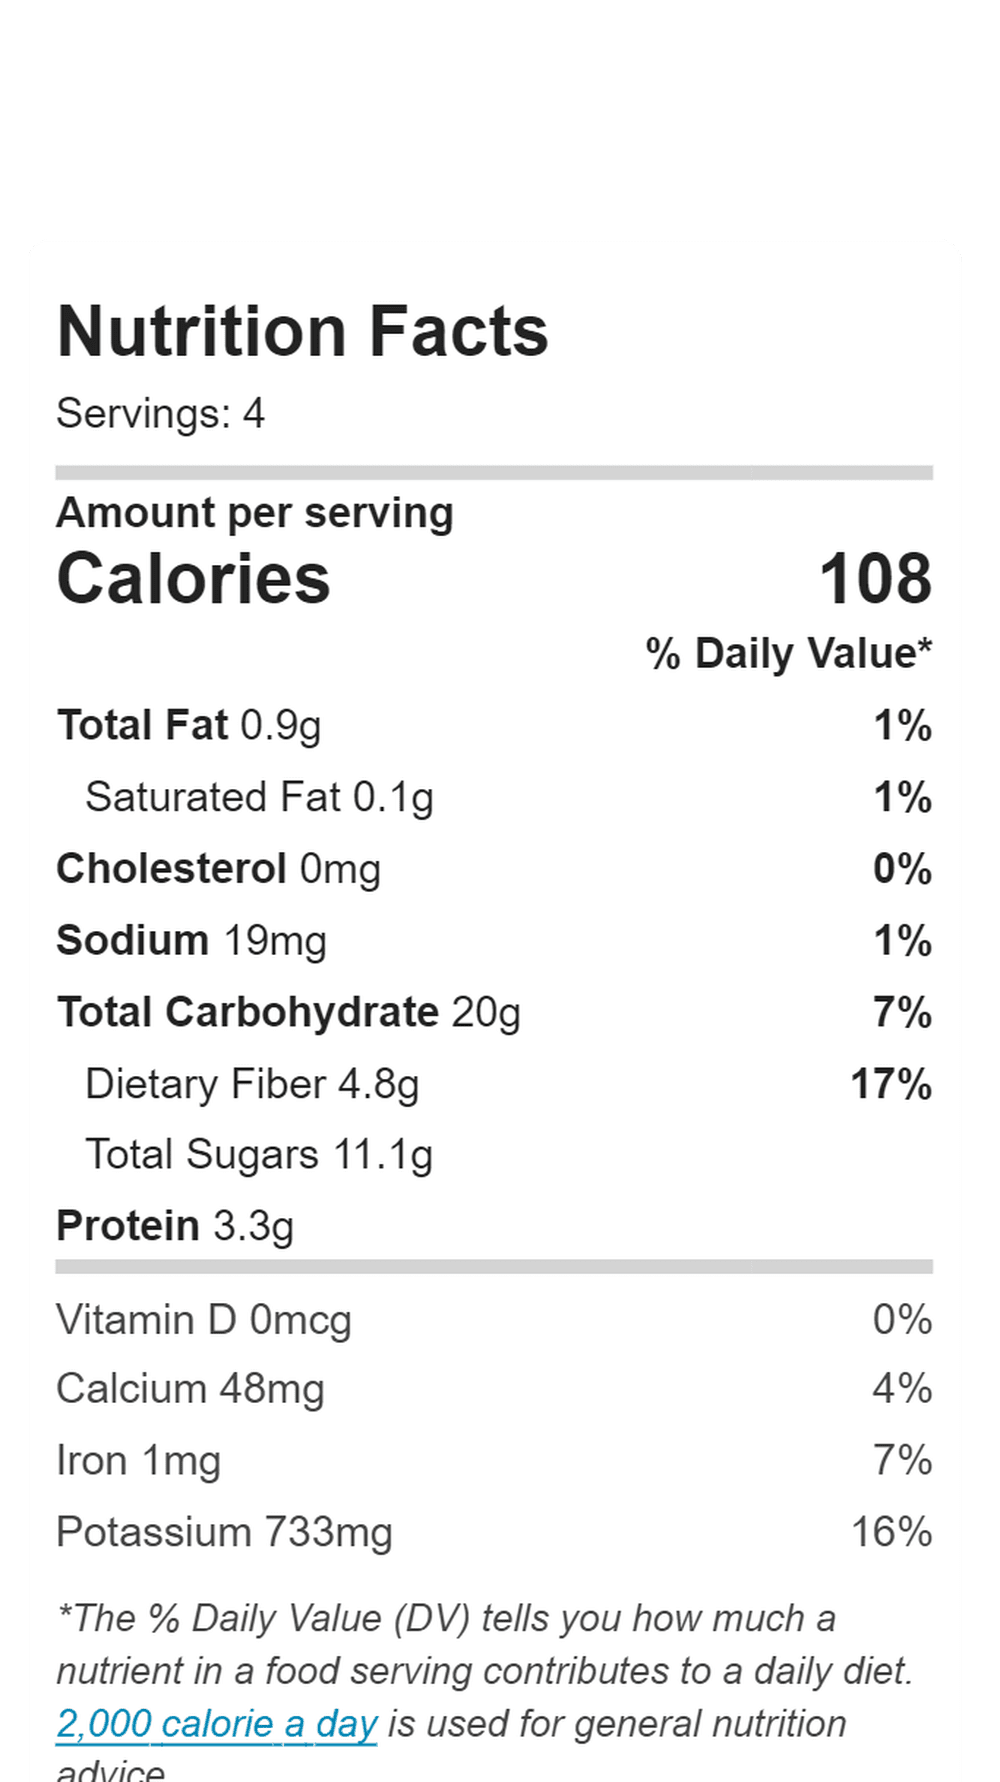 nutrition and calories in tomato and roasted red pepper pasta sauce - 108 calories per portion, 0.9 grams of fat, 3.3 grams of protein, 11.1 grams of sugar and 20 grams of carbs. 